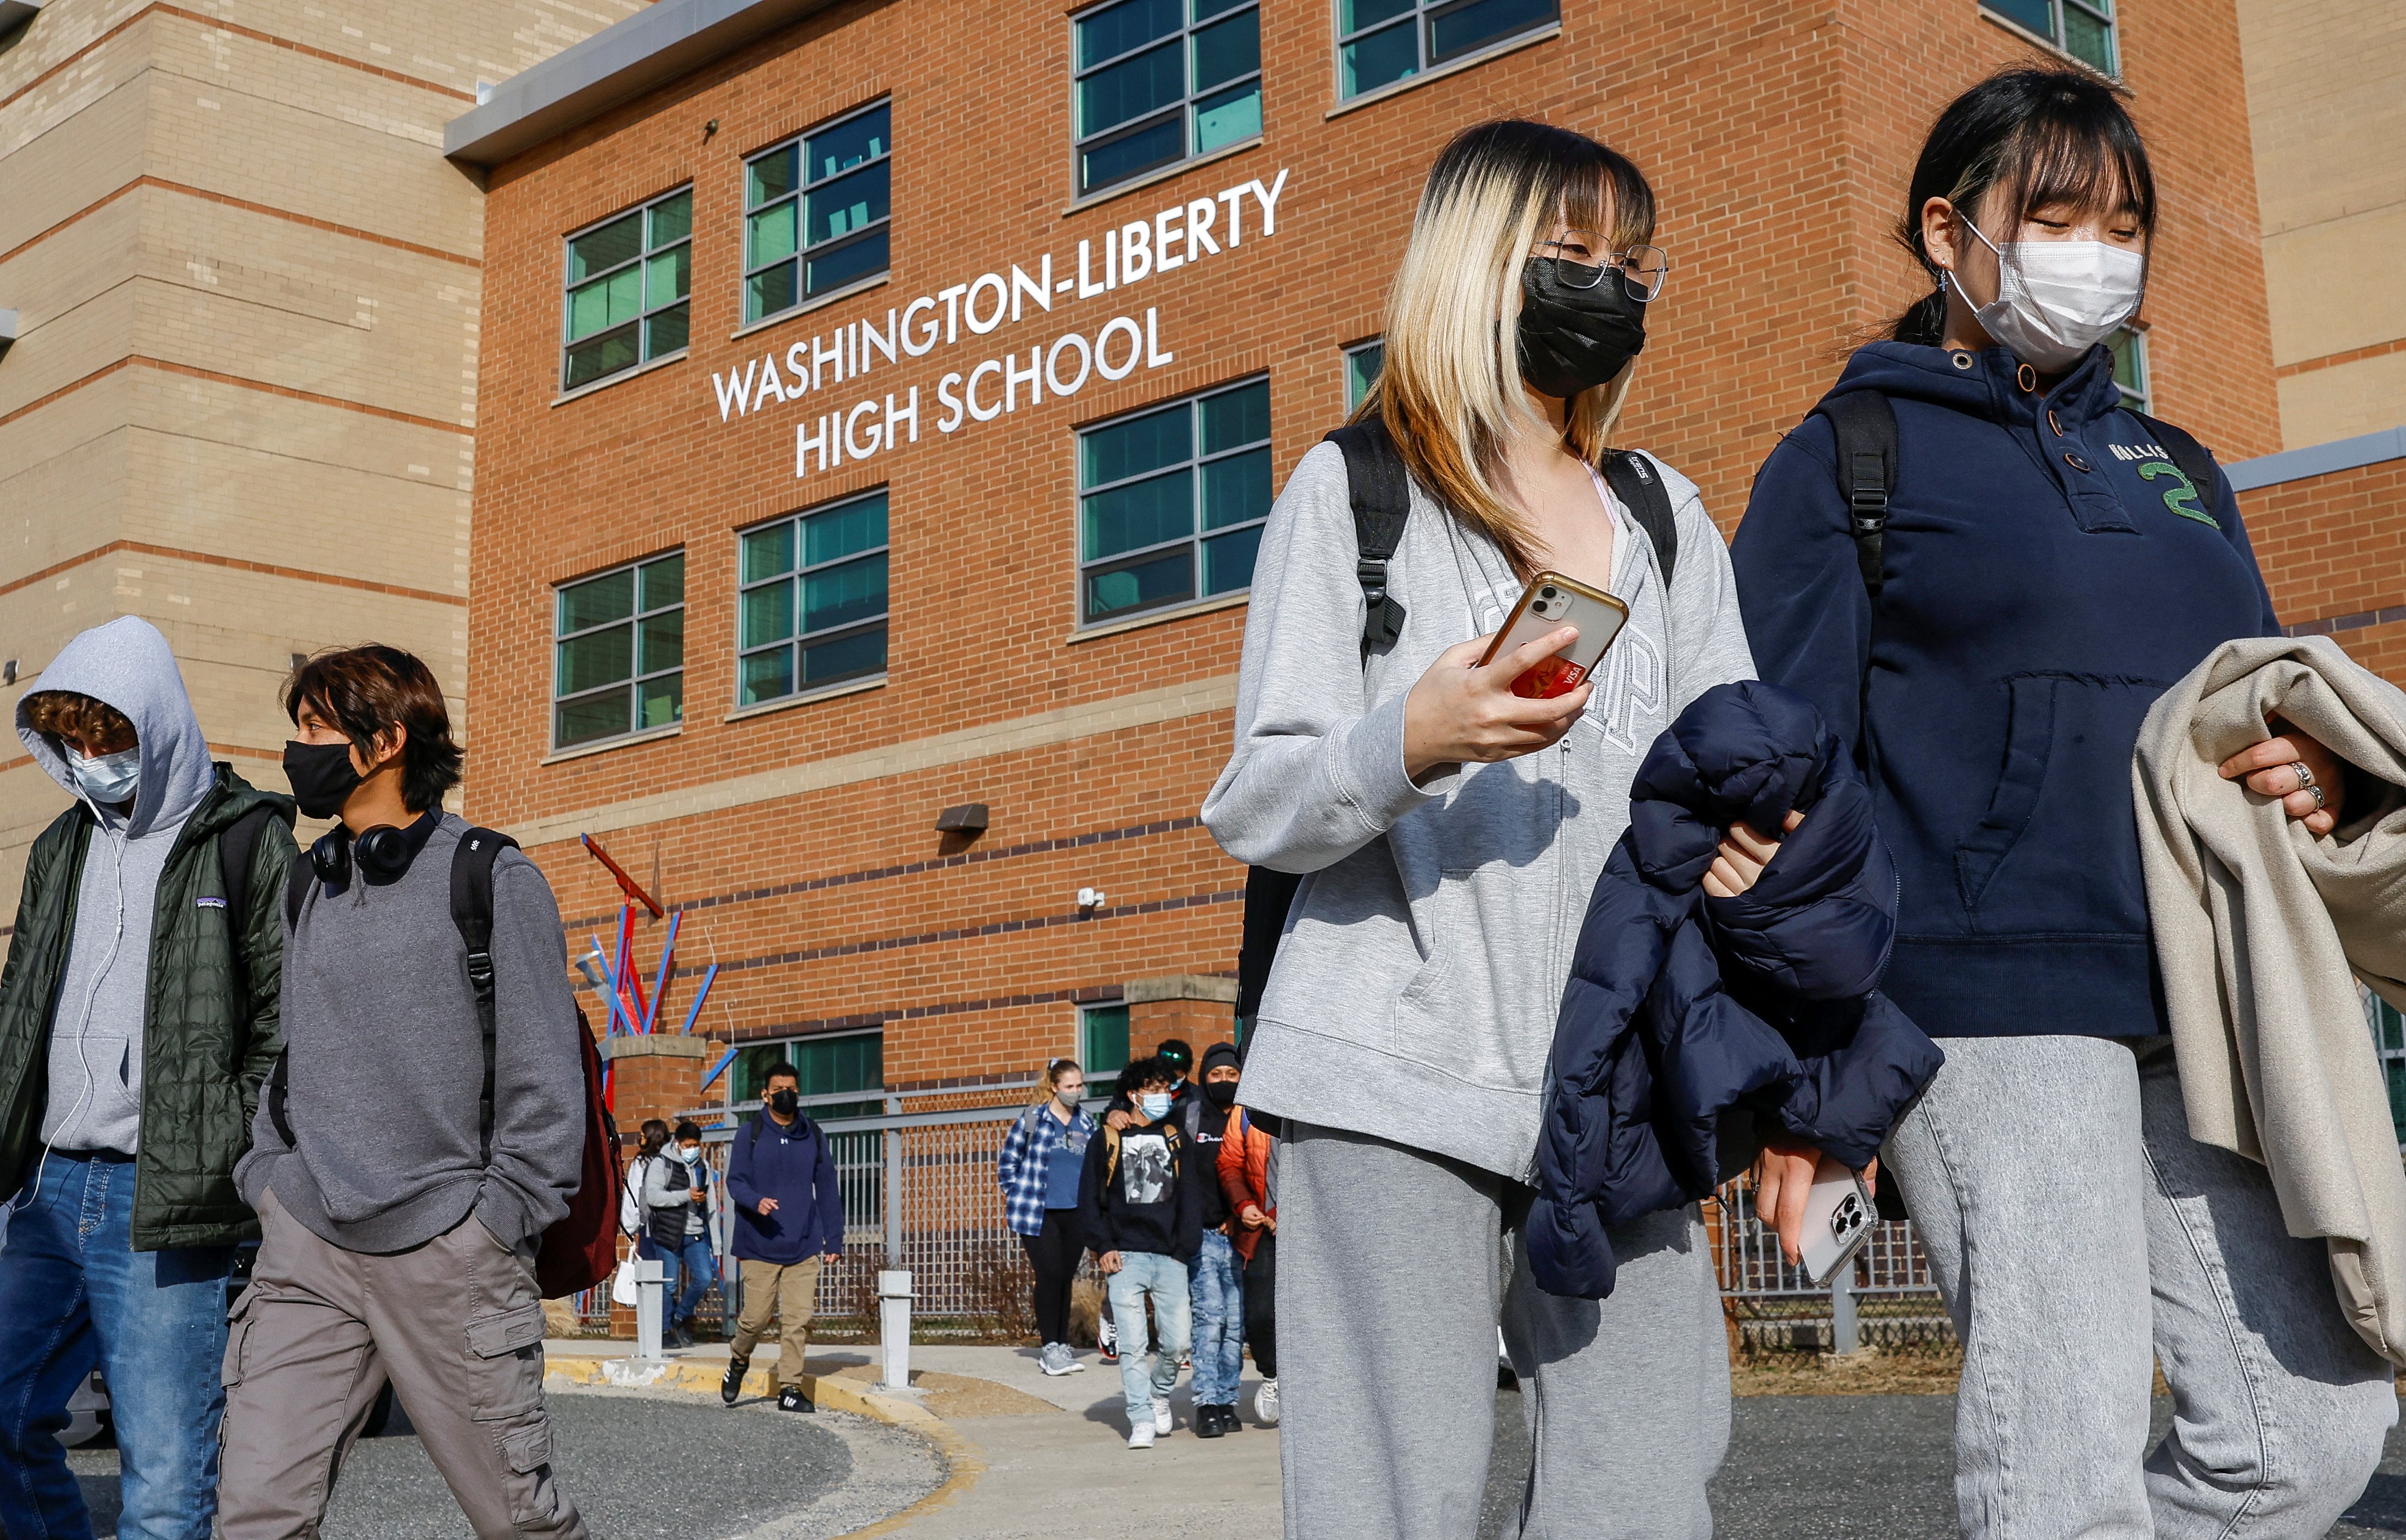 Students are seen in Arlington, Va., Jan. 25, 2022. (CNS photo/Evelyn Hockstein, Reuters)